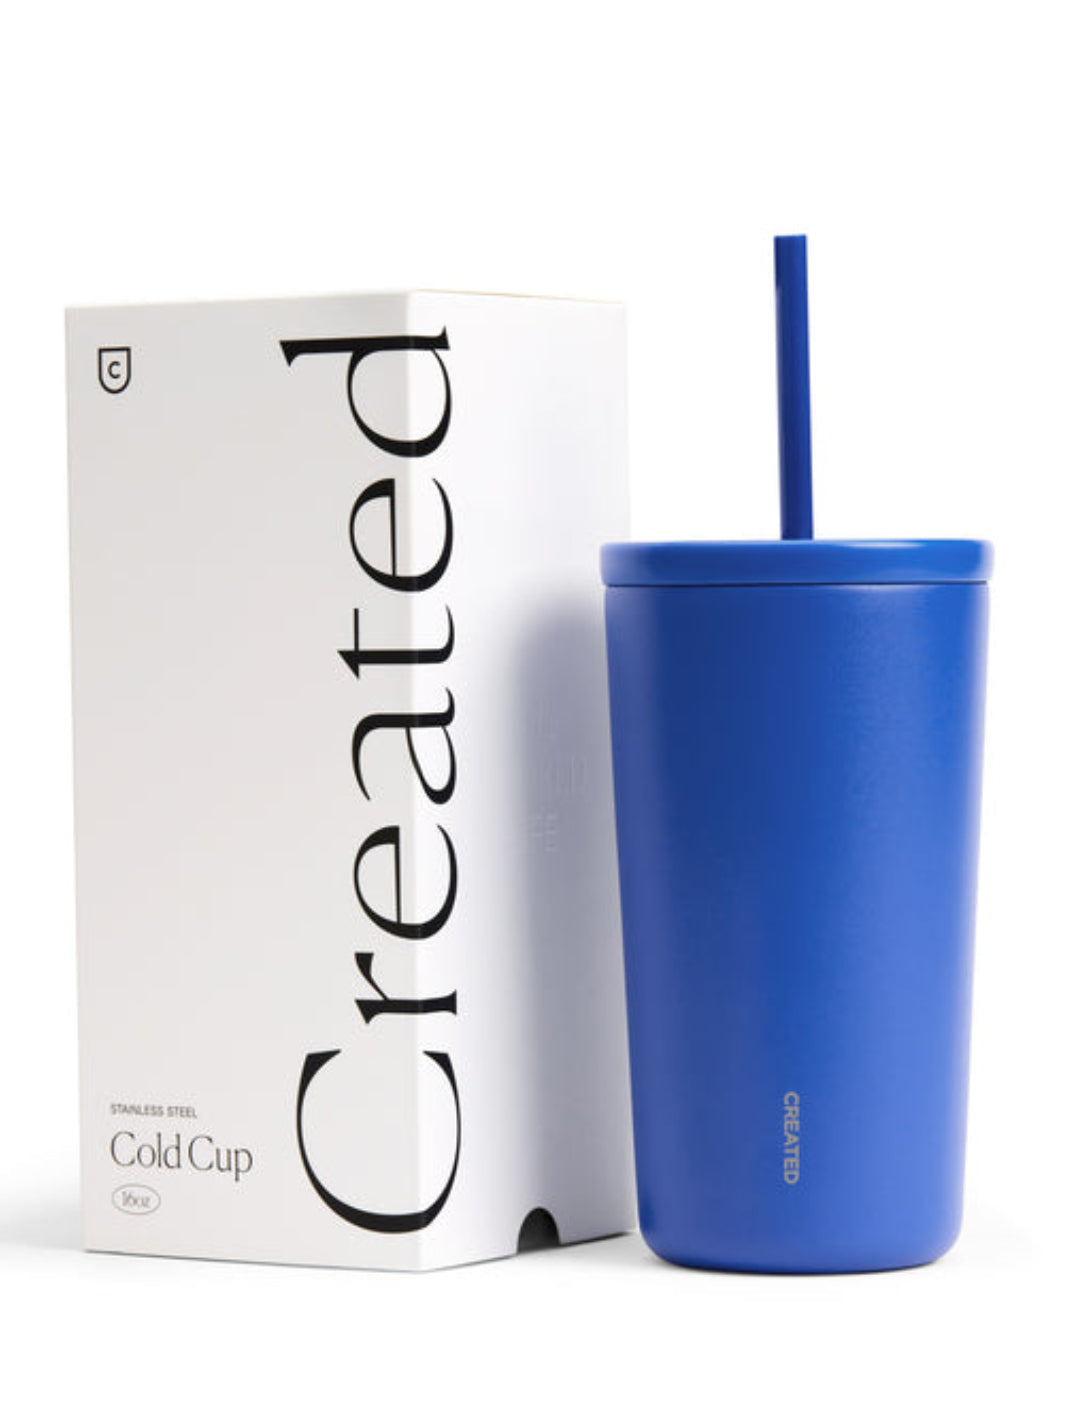 CREATED CO. Cold Cup (16oz/454ml)